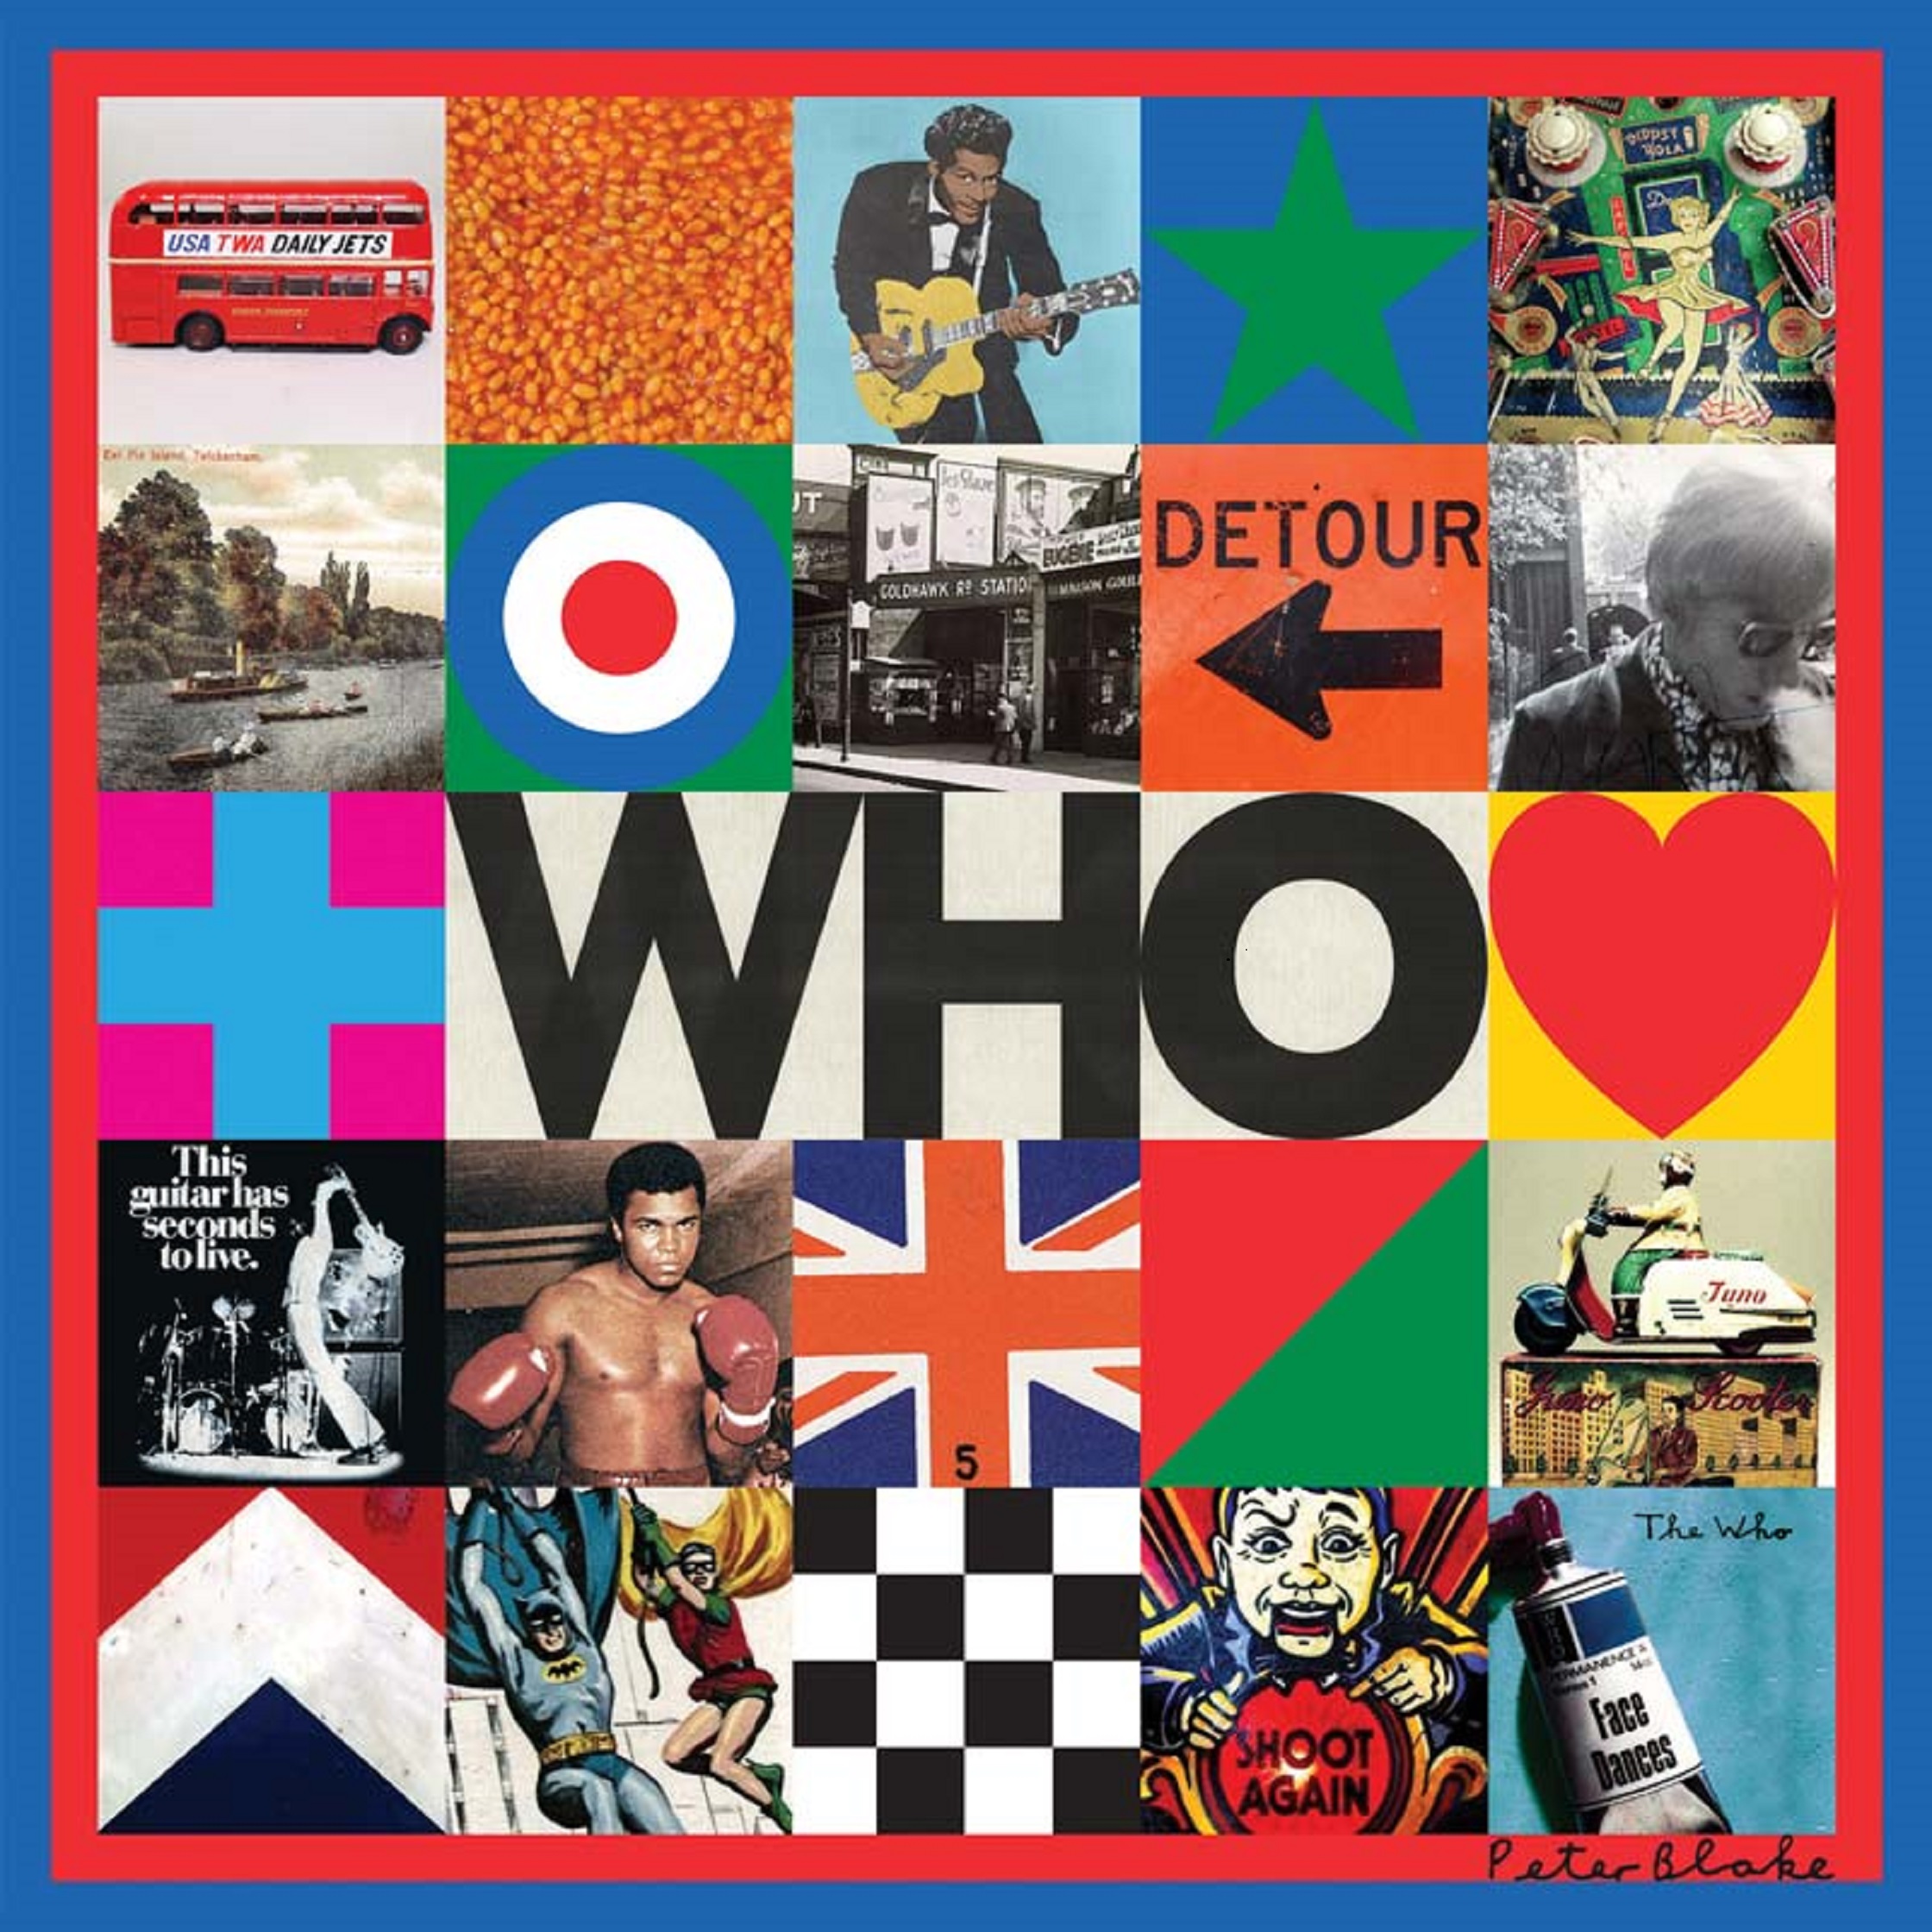 THE WHO - Release 3rd Single 'I DON'T WANNA GET WISE